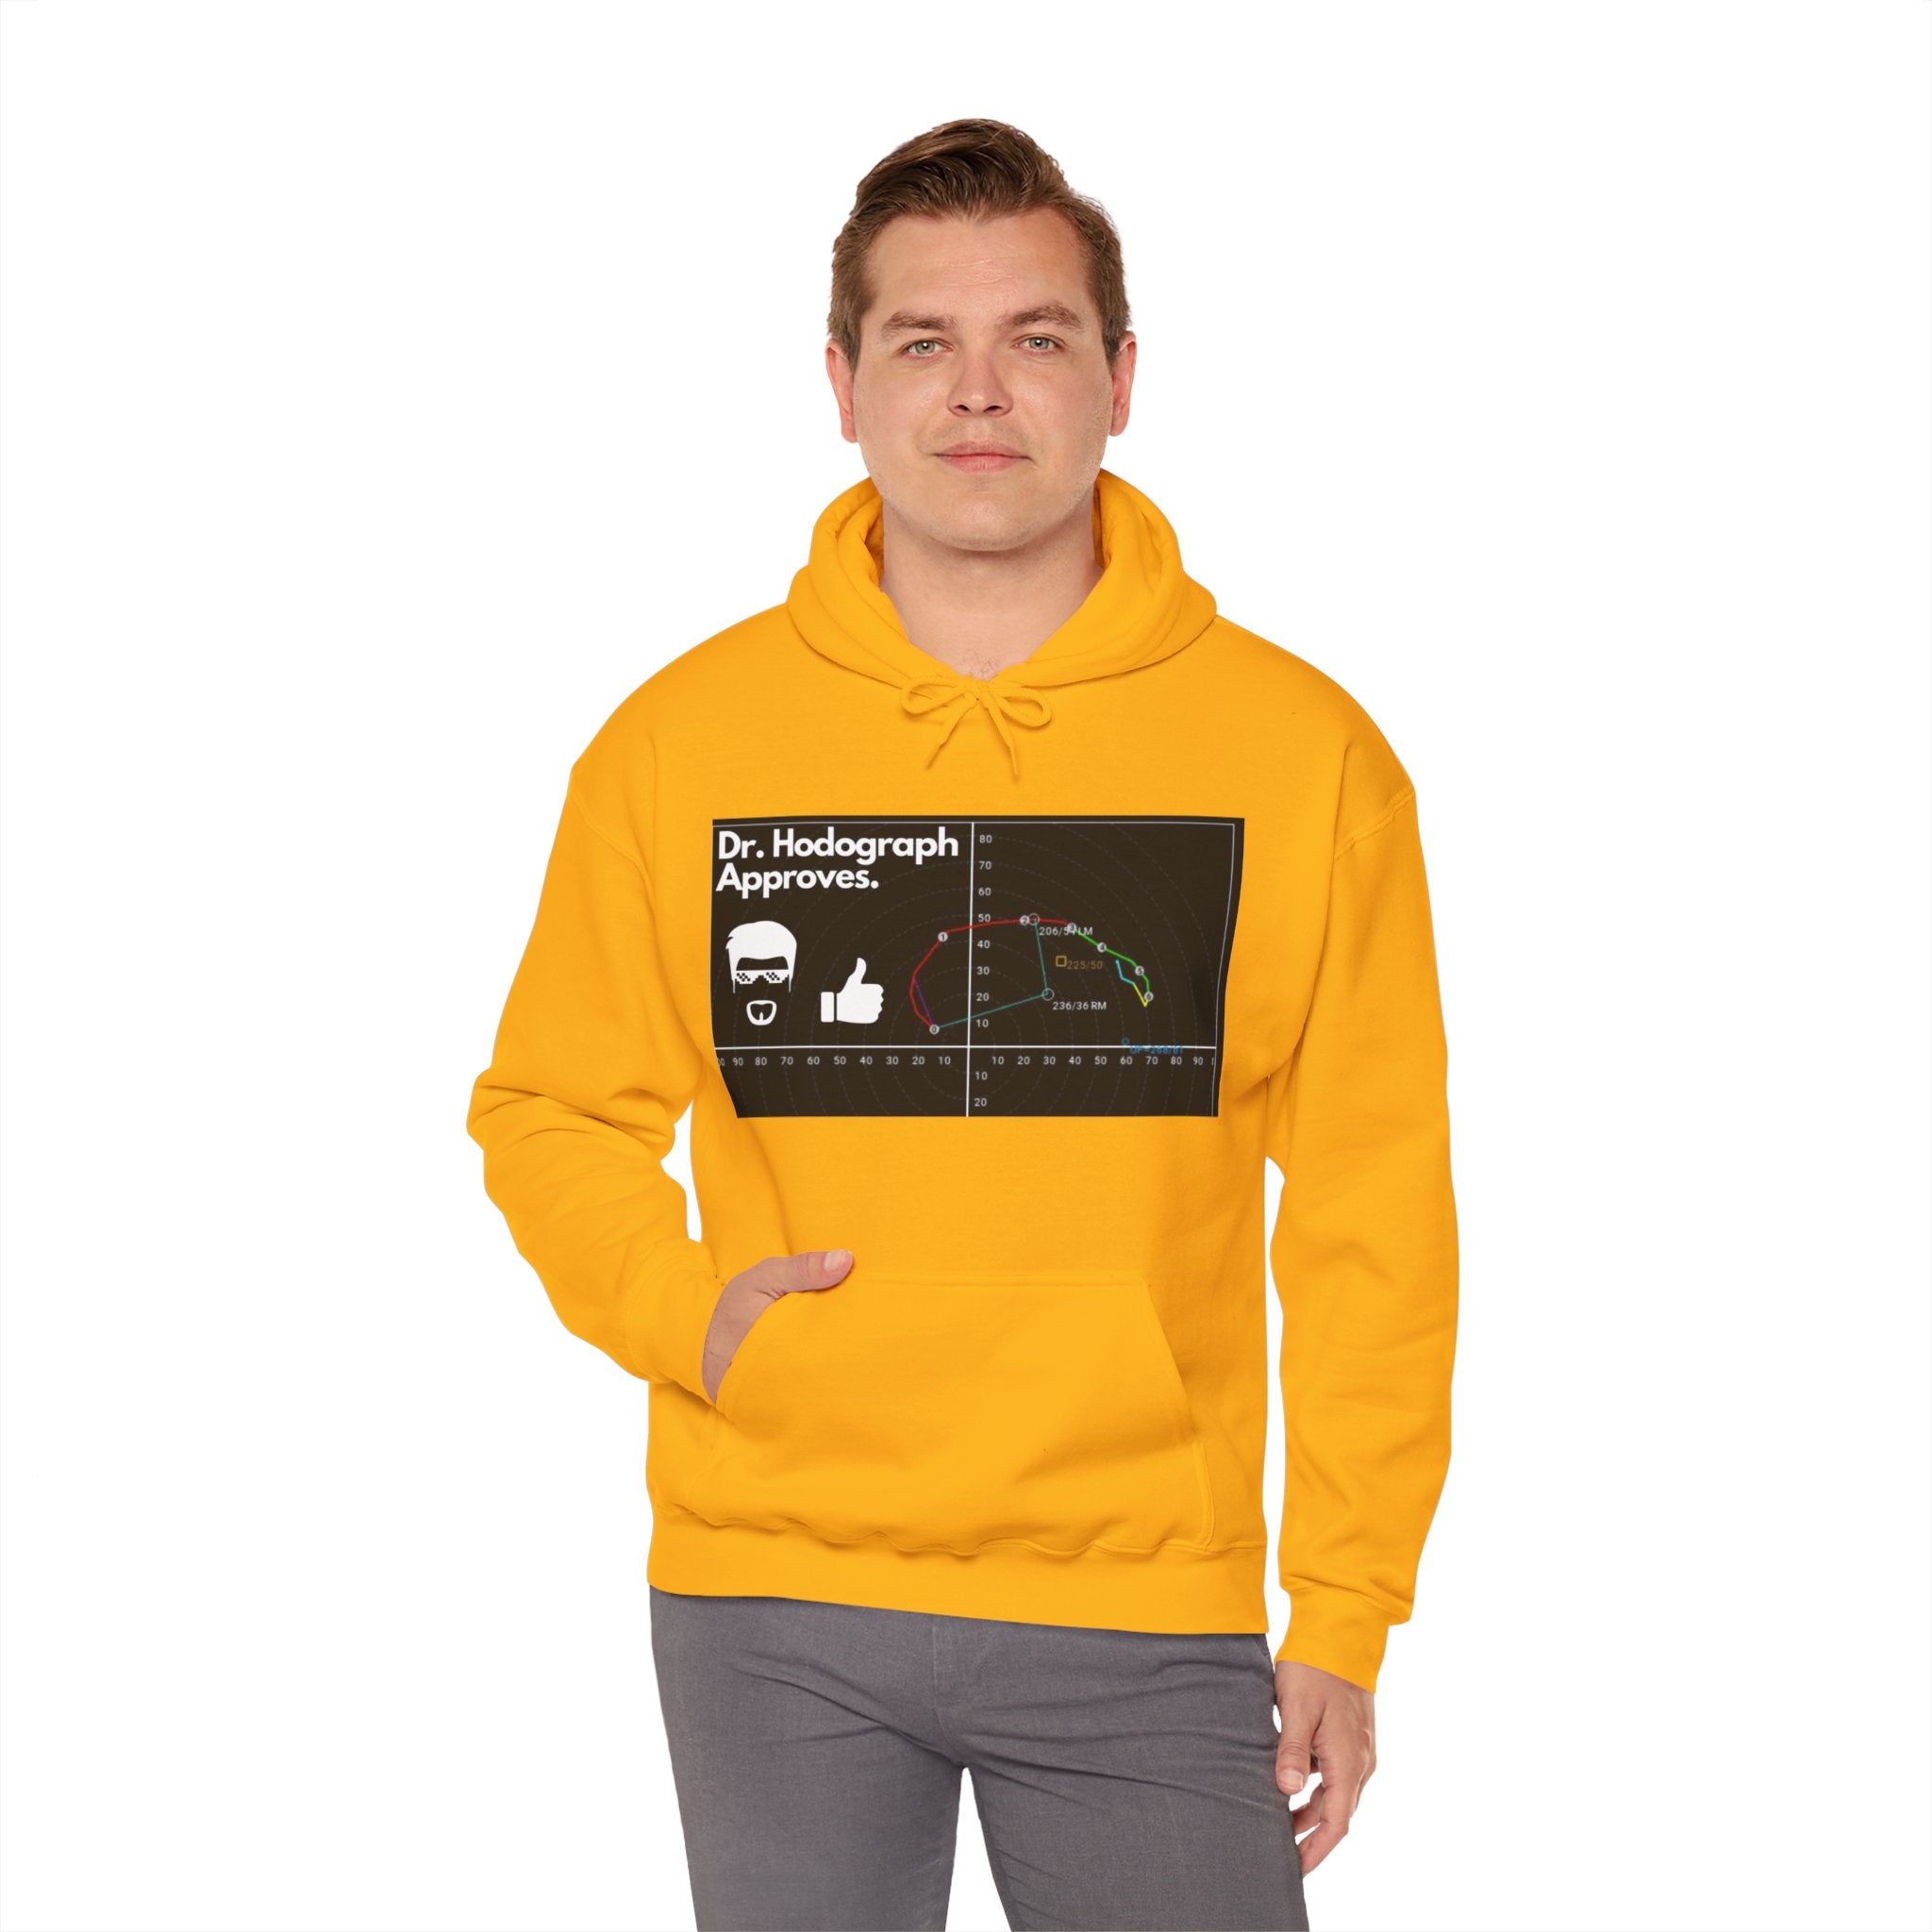 Dr Hodograph Approves Hoodie 